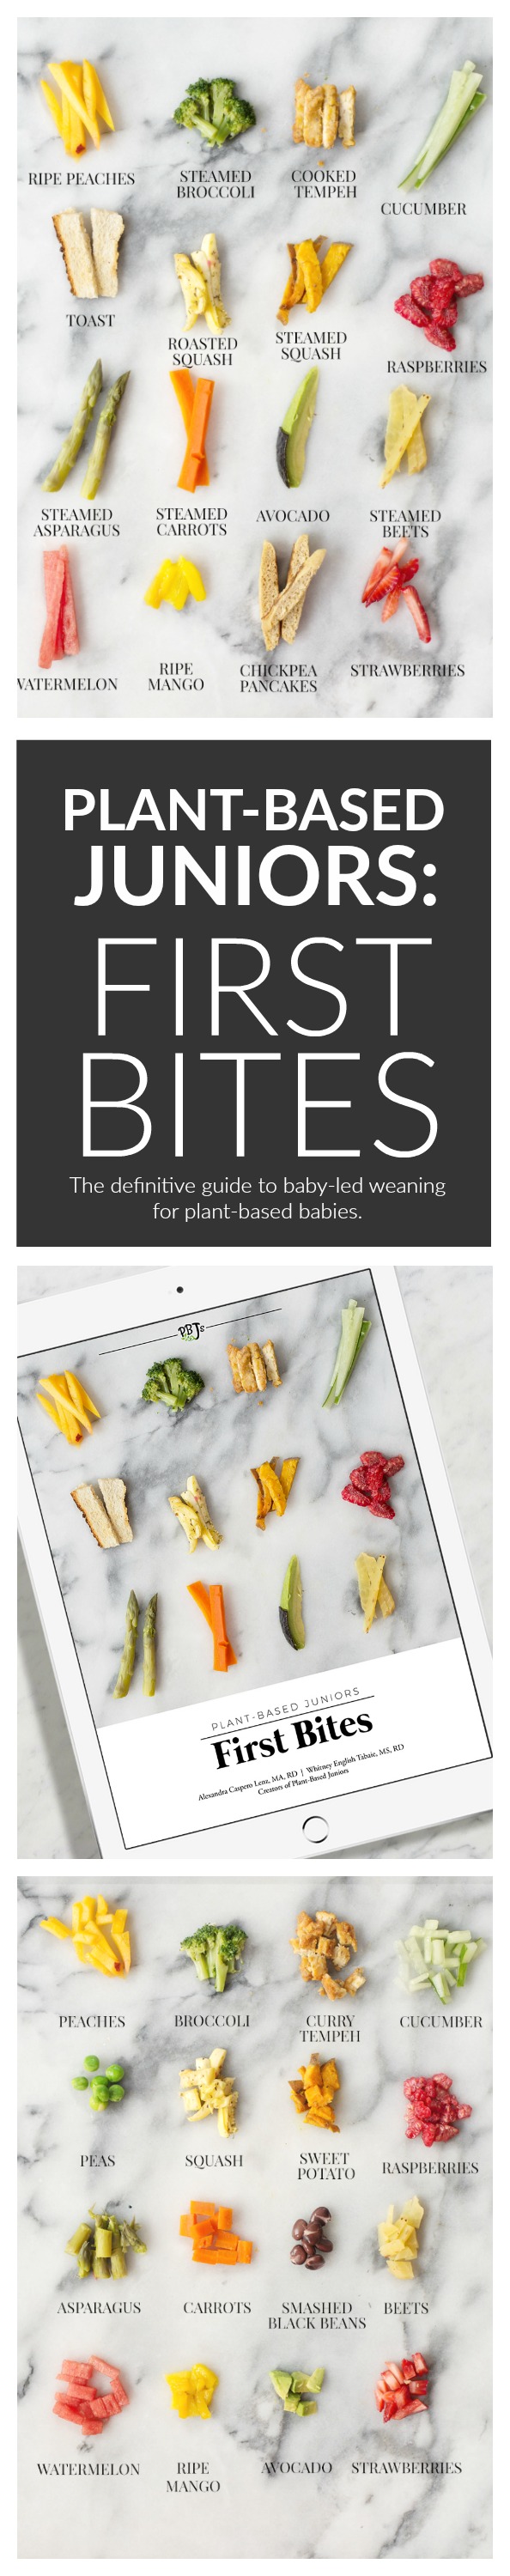 https://www.whitneyerd.com/wp-content/uploads/2018/08/Plant-Based-Juniors-First-Bites-the-definitive-guide-to-baby-led-weaning-for-plant-based-babies.-.jpg